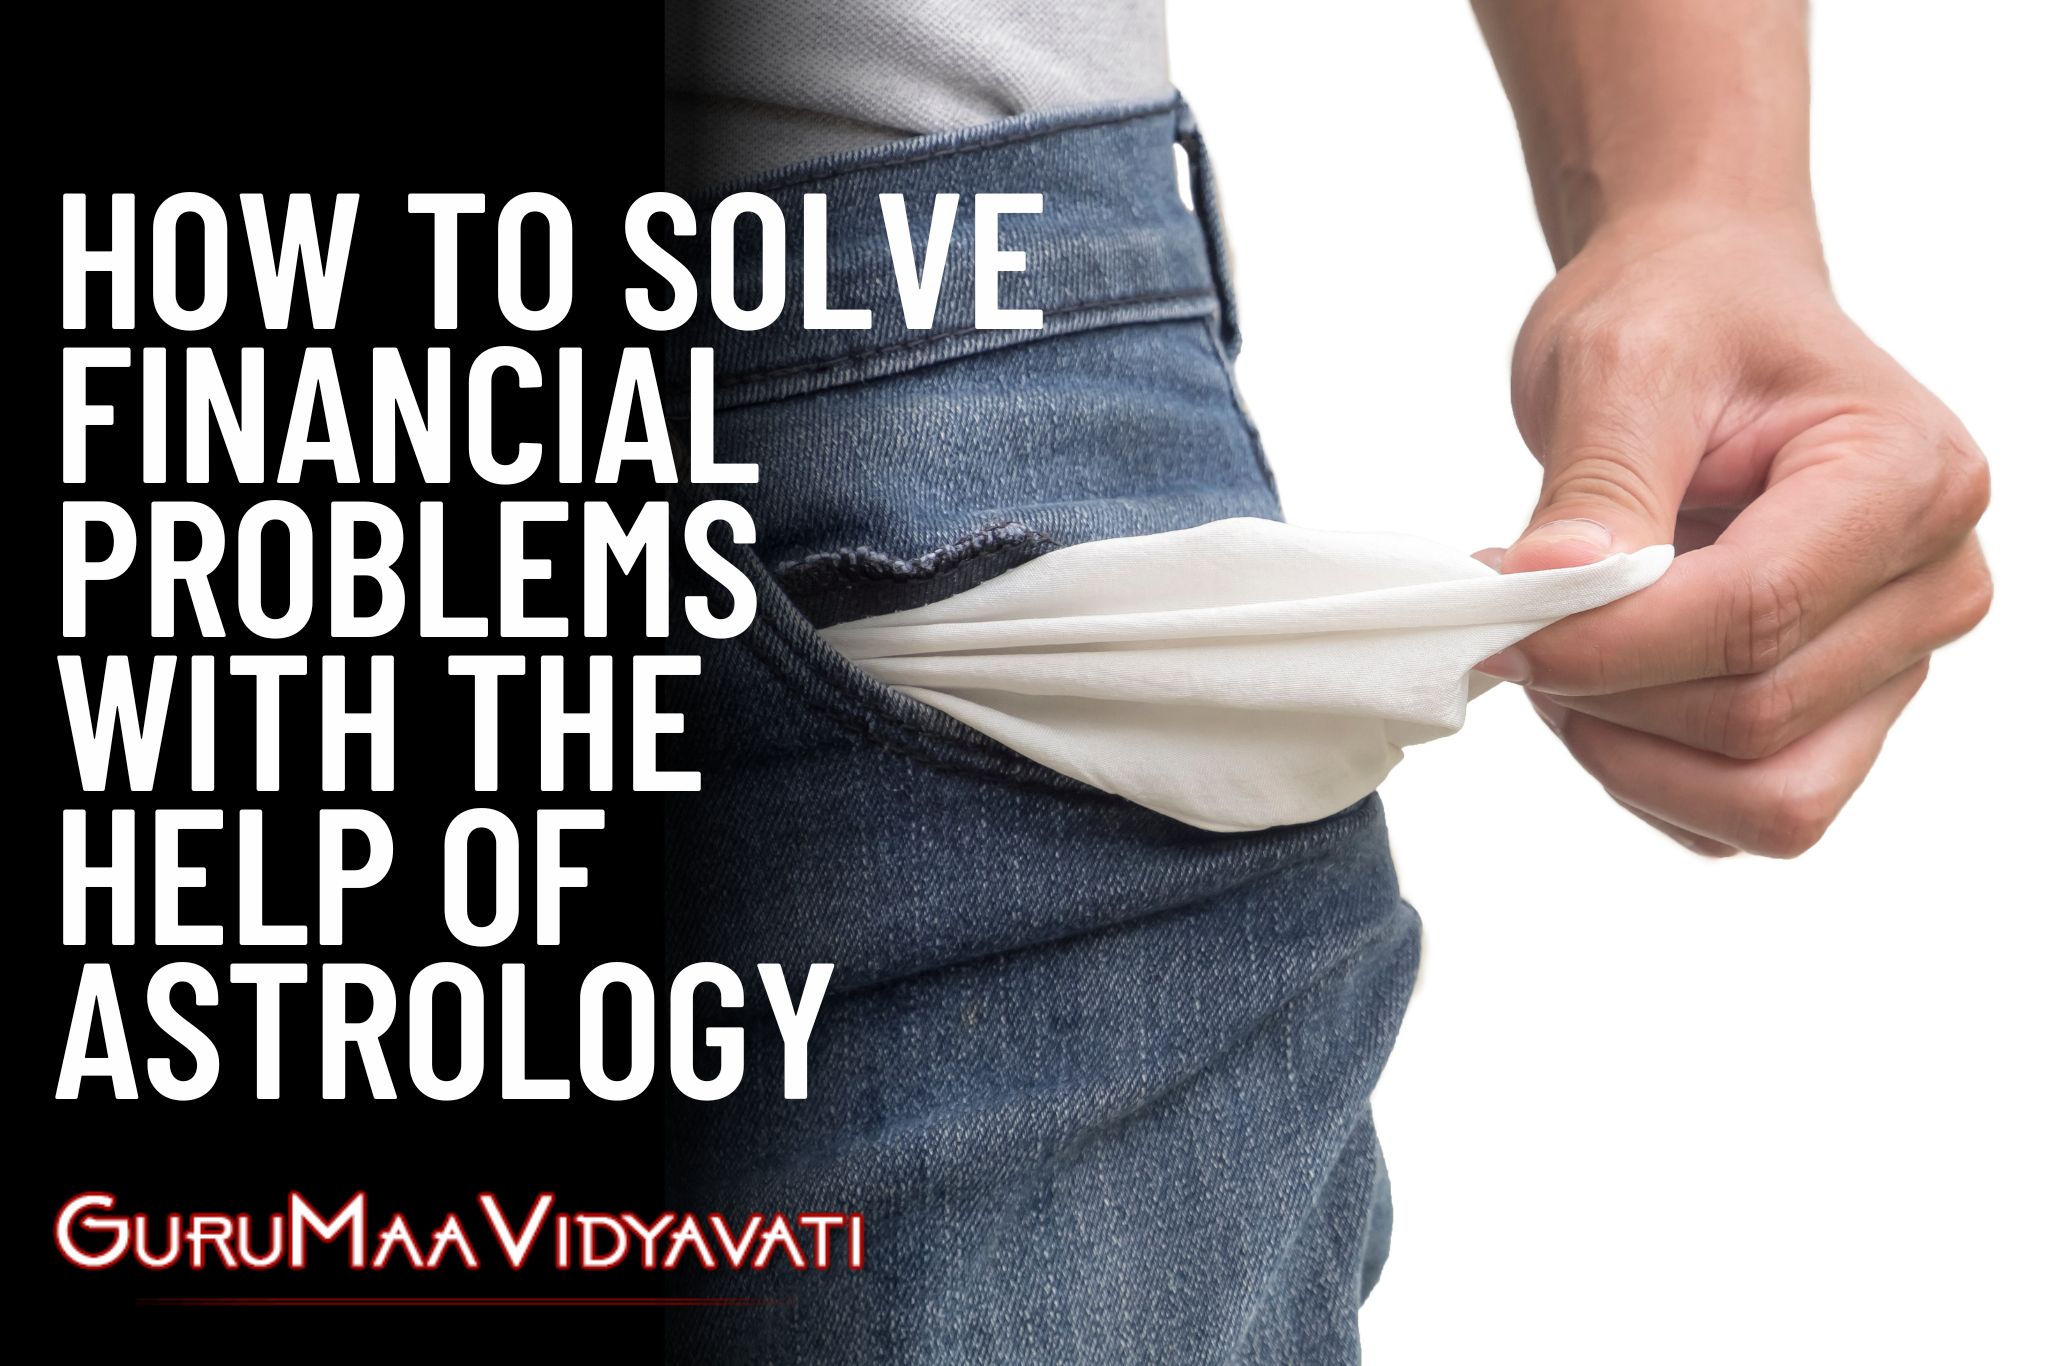 How to Solve Financial Problems With the Help of Astrology